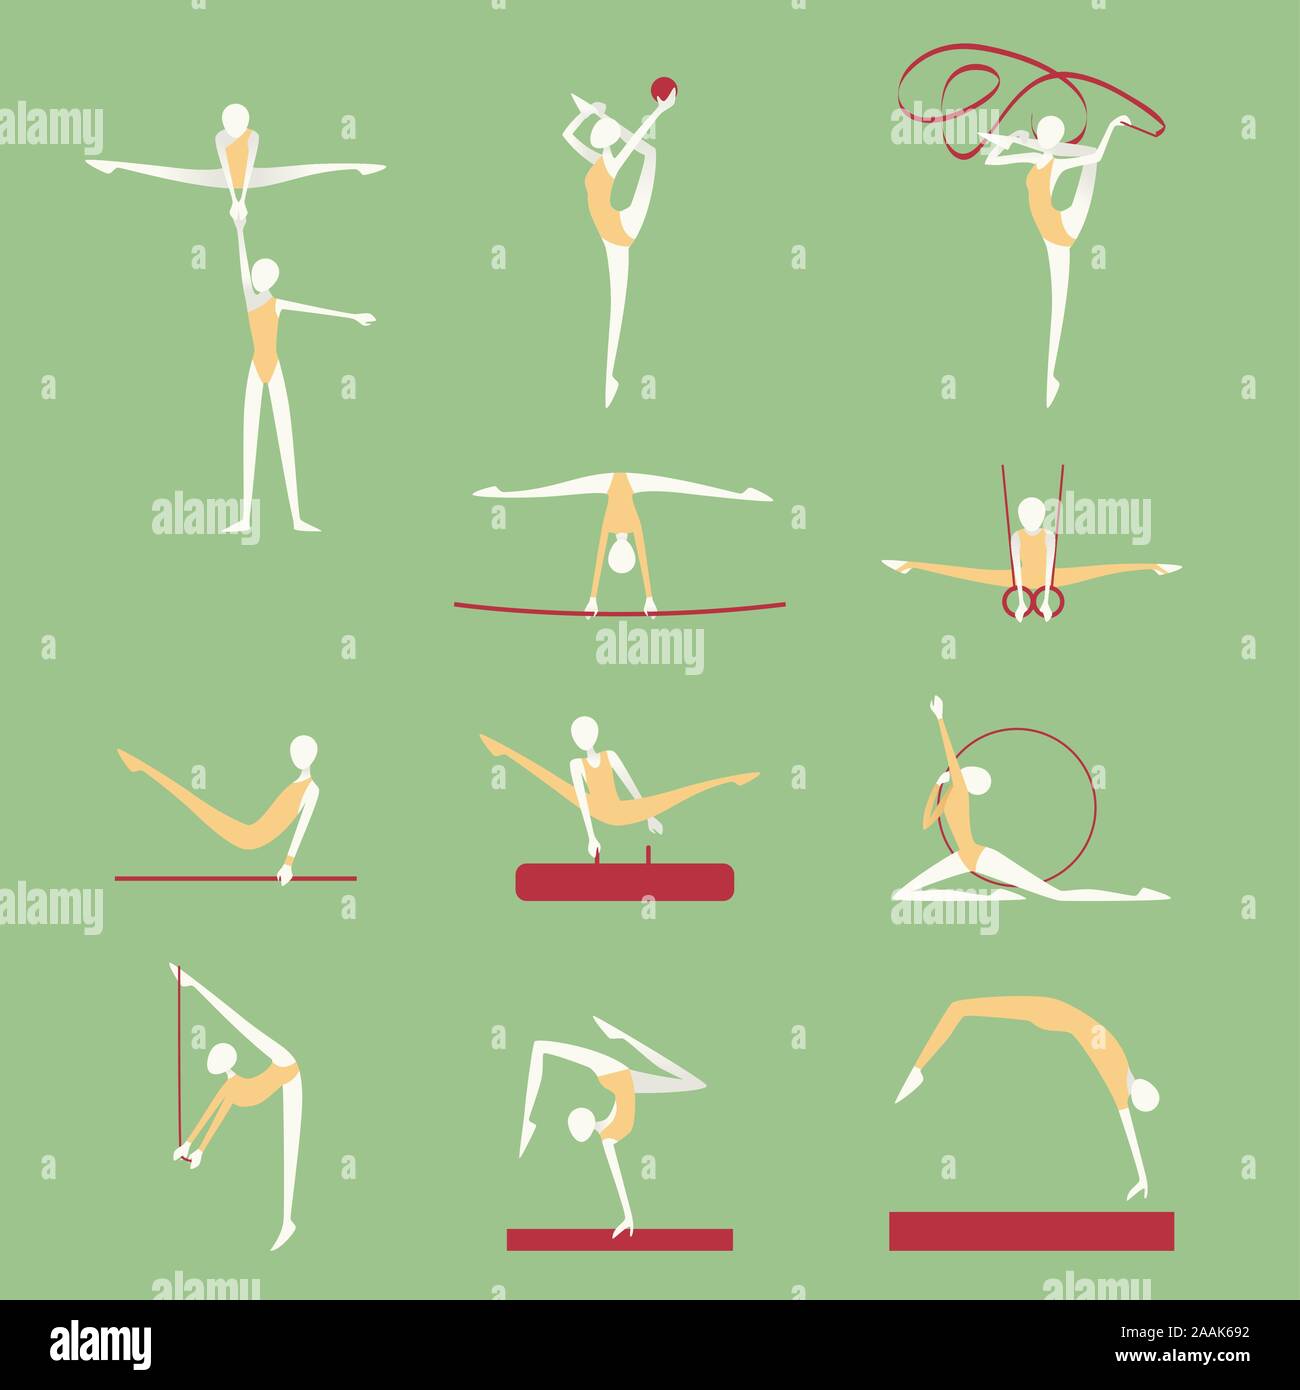 Sports gymnastic poses handstand silhouette Vector Image